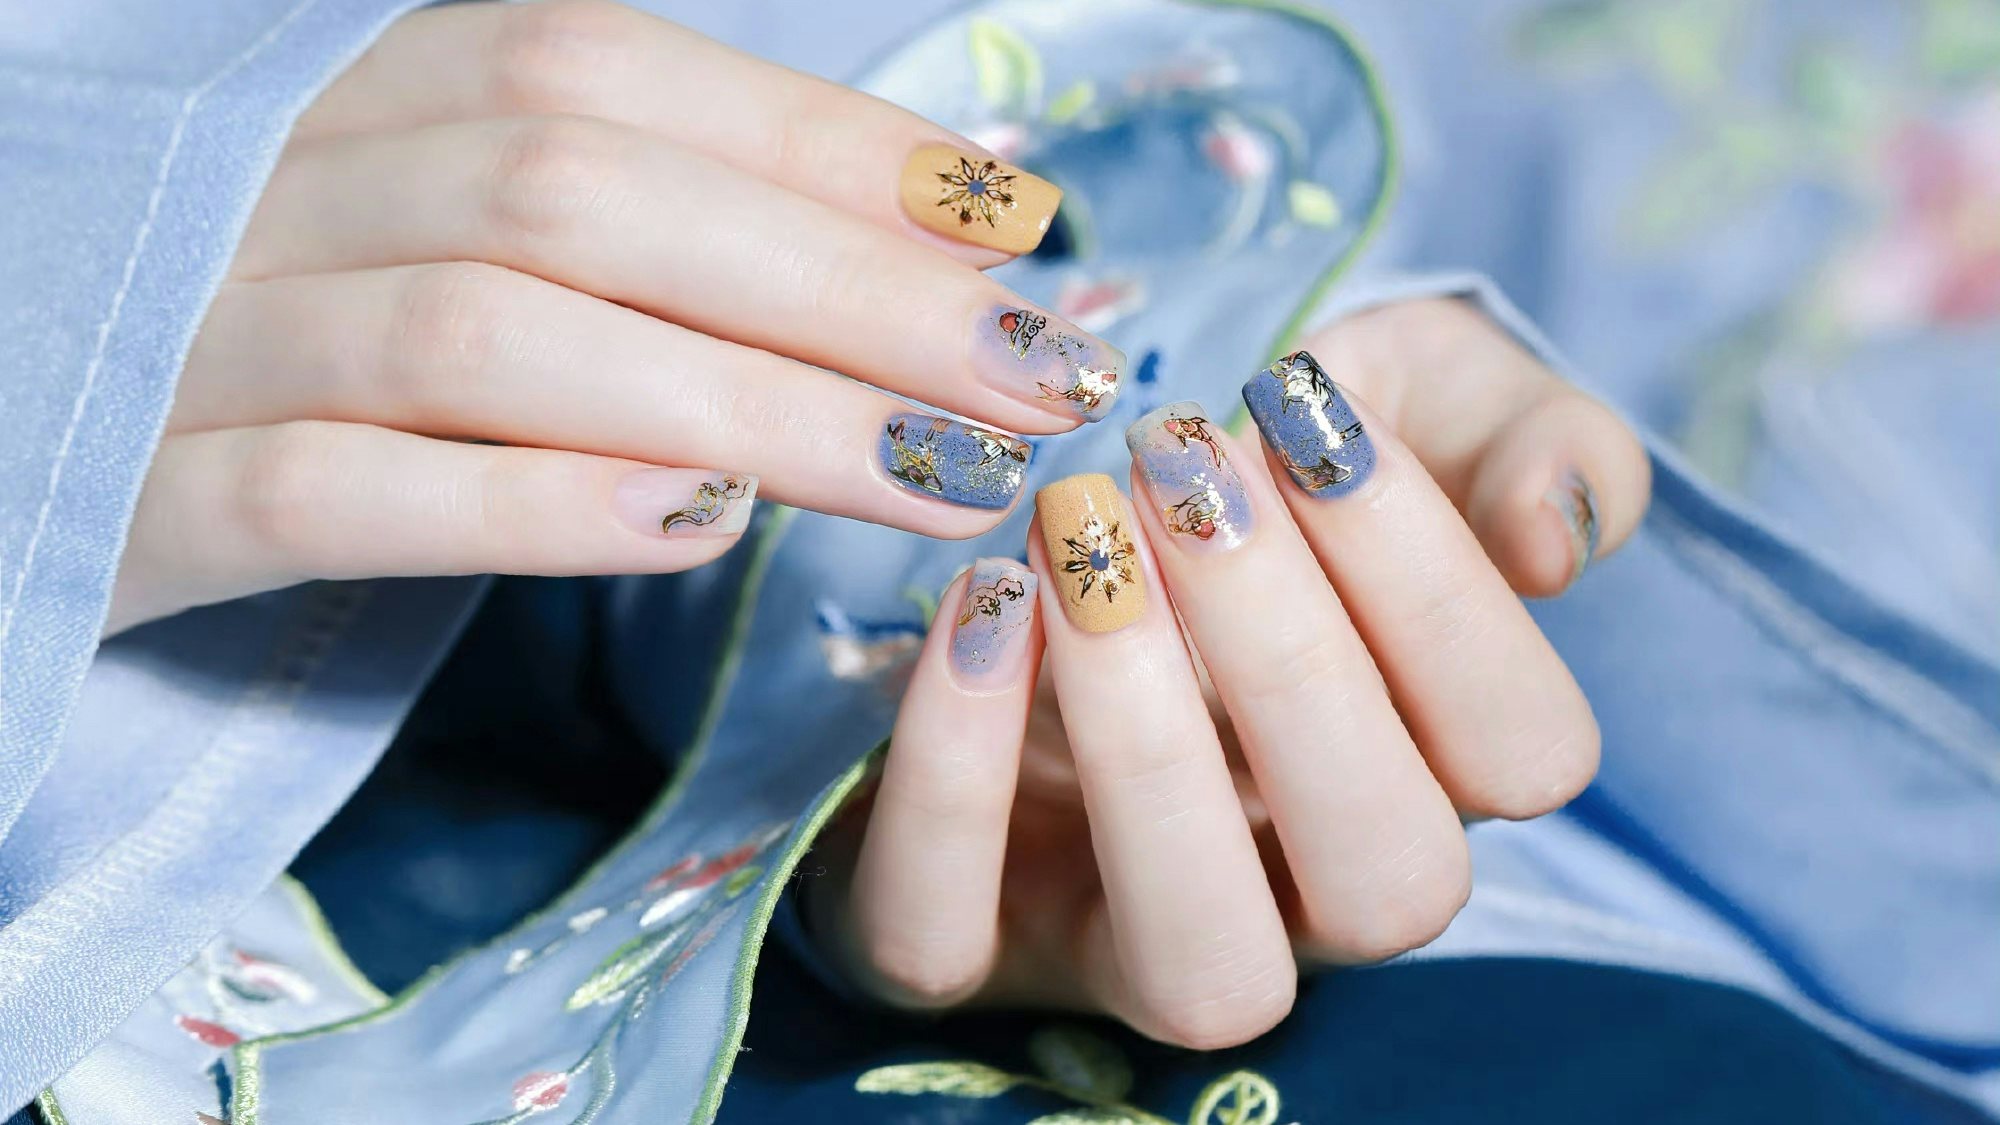 The “Nail Effect” is China's new “Lipstick Index." With younger generations pursuing bolder, personality-imbued nail art, modern C-beauty businesses are making waves. Photo: Miss Candy
